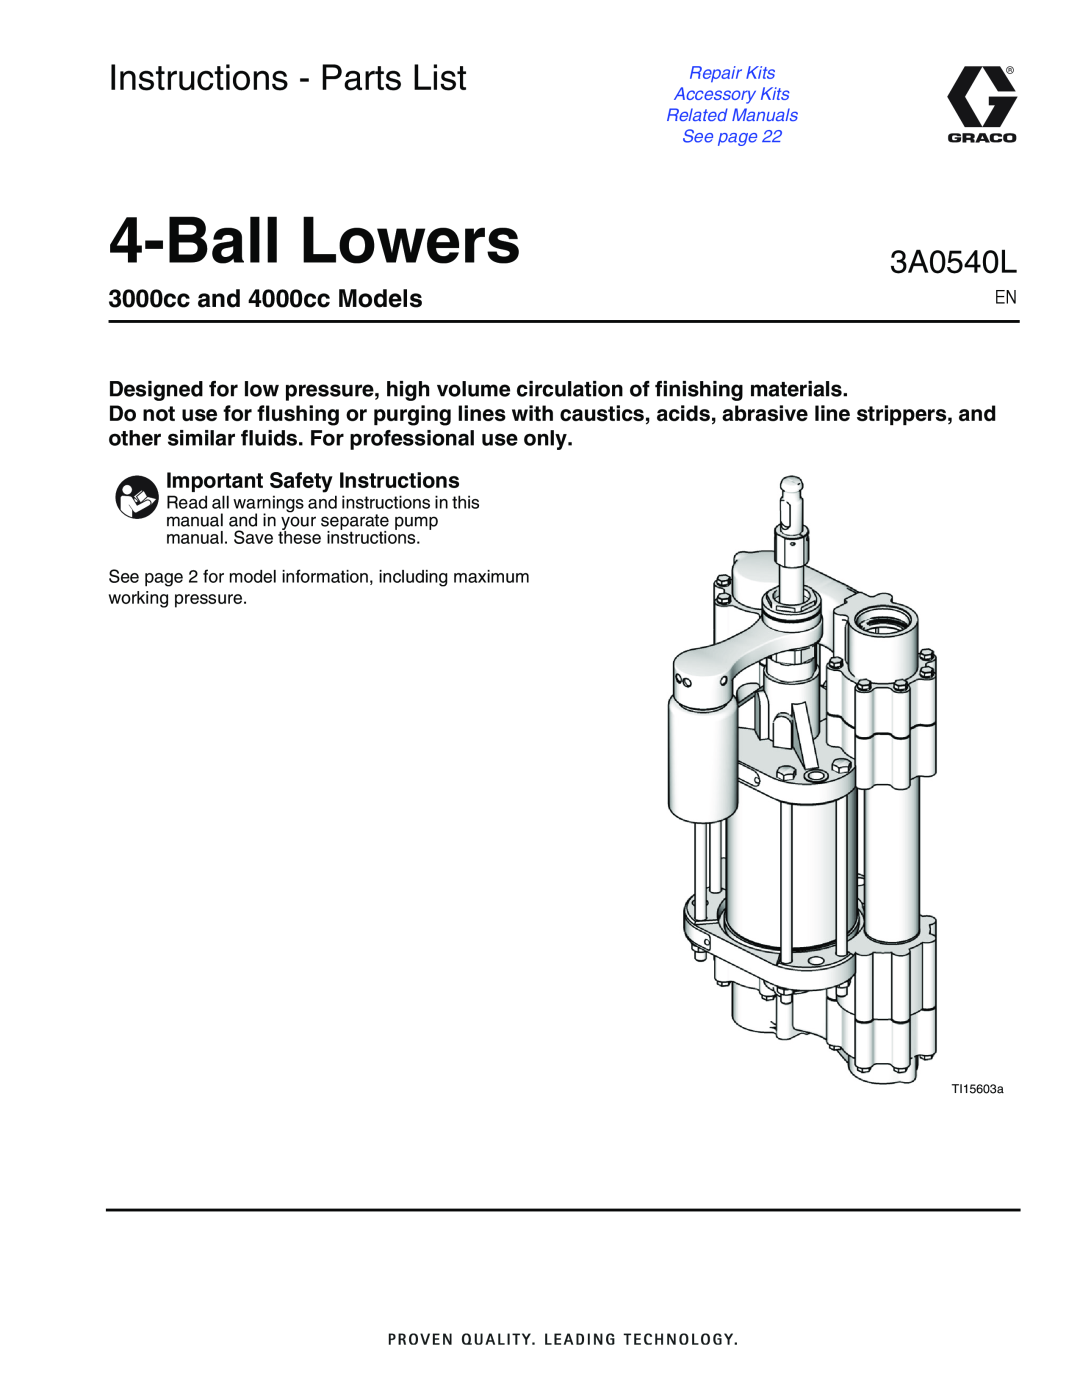 Graco important safety instructions Ball Lowers, Instructions - Parts List, 3A0540L, 3000cc and 4000cc Models 